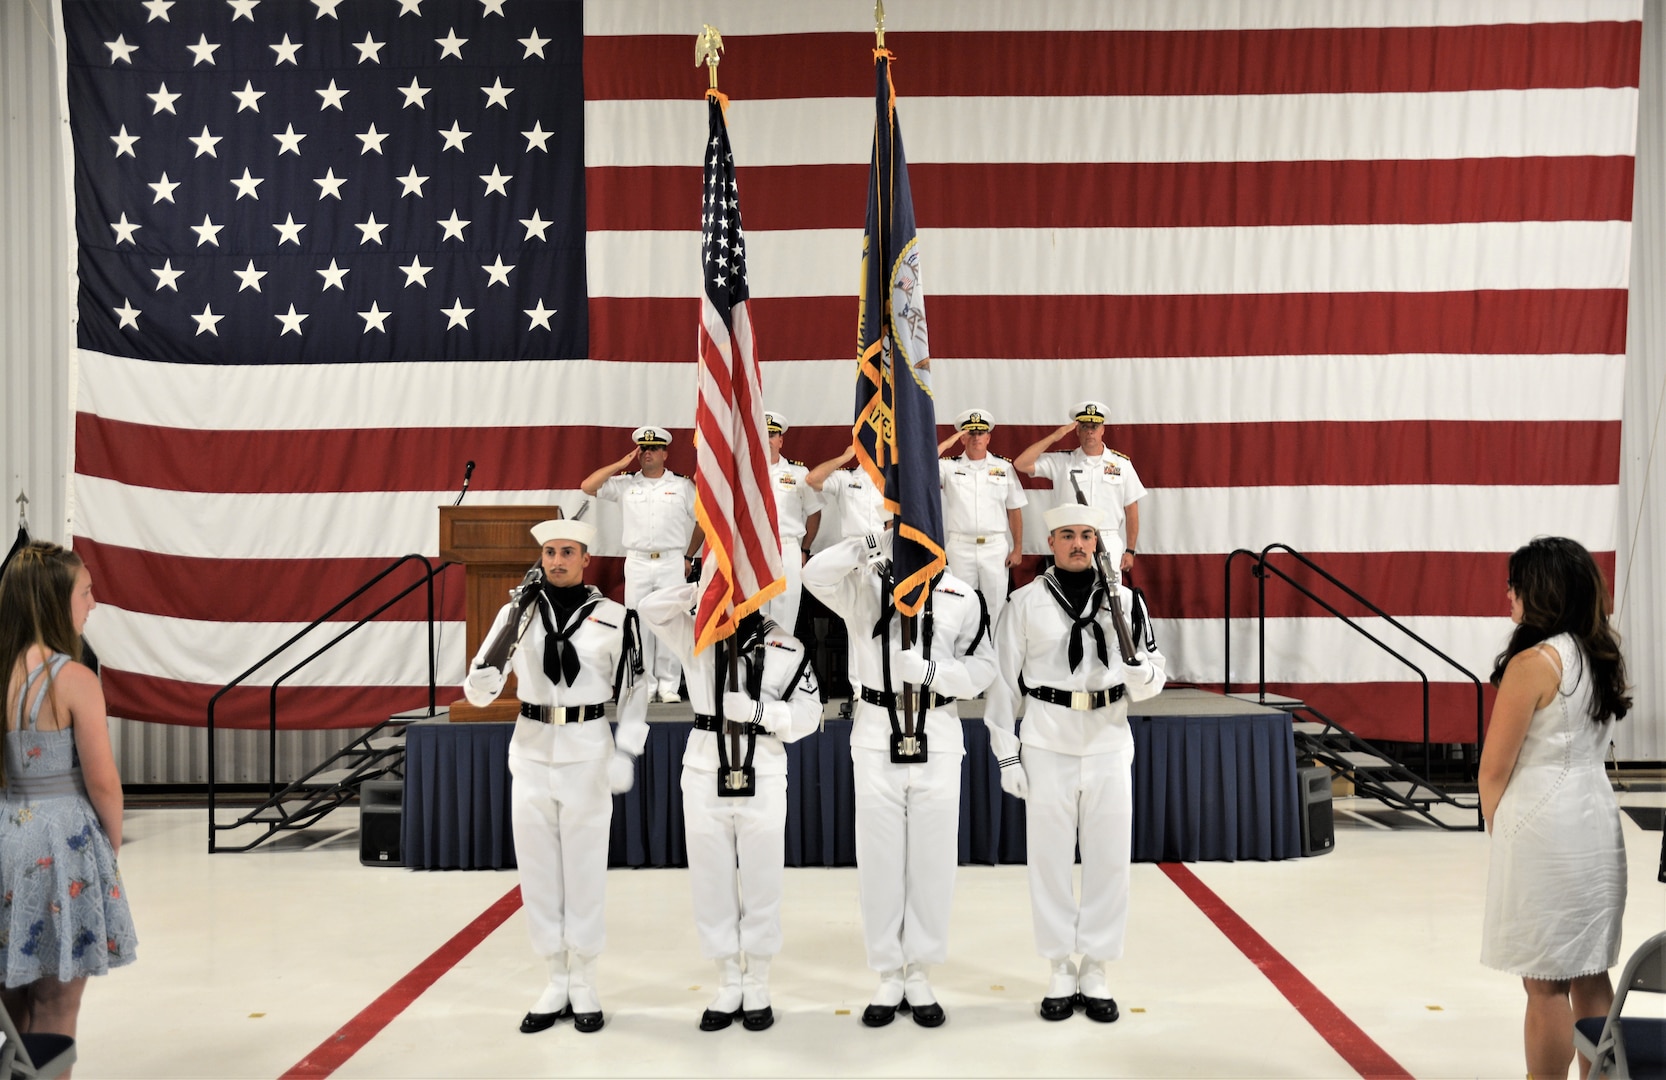 IMAGE: Ceremonial Color Guard members prepare to present colors prior to the national anthem. More than 200 Sailors and guests attended a traditional change of command ceremony at Naval Air Station (NAS) Oceana’s Center for Naval Aviation Technical Training Unit’s ceremonial hangar aboard NAS Oceana June 27 where Cmdr. Andrew Hoffman was relieved of command by Cmdr. Joseph Oravec. Oravec became the 28th commanding officer, Naval Surface Warfare Center Dahlgren Division, Dam Neck Activity.